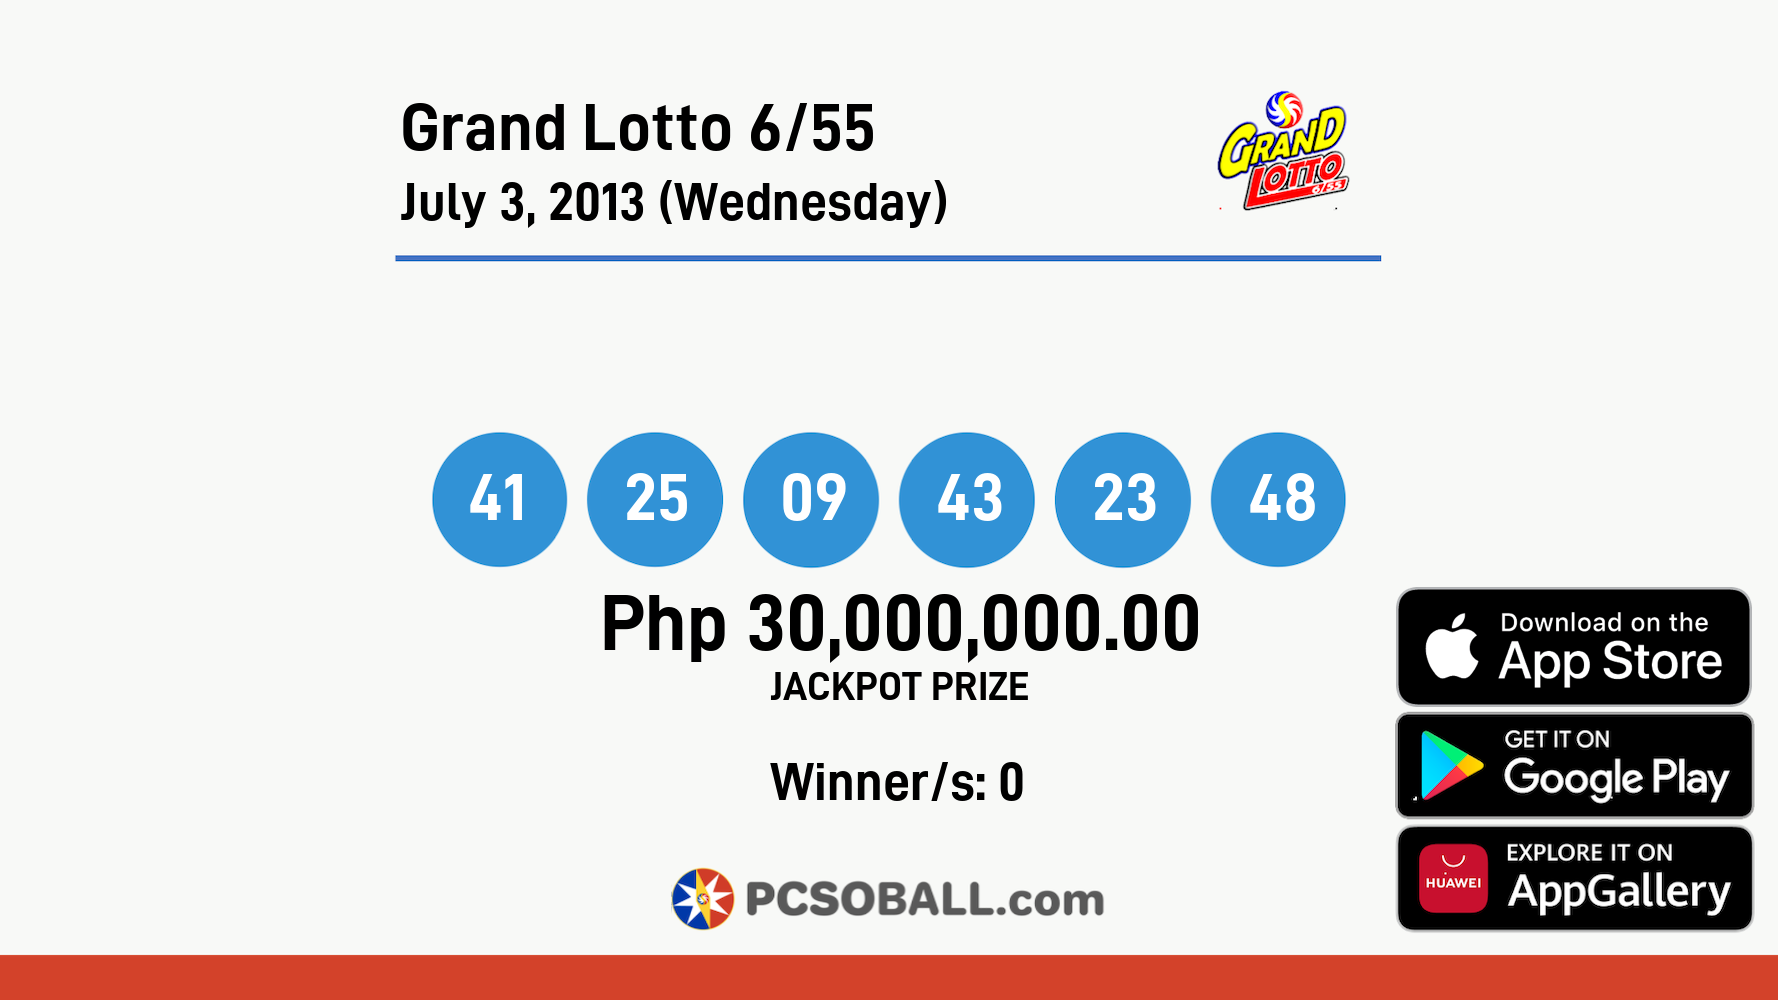 Grand Lotto 6/55 July 3, 2013 (Wednesday) Result